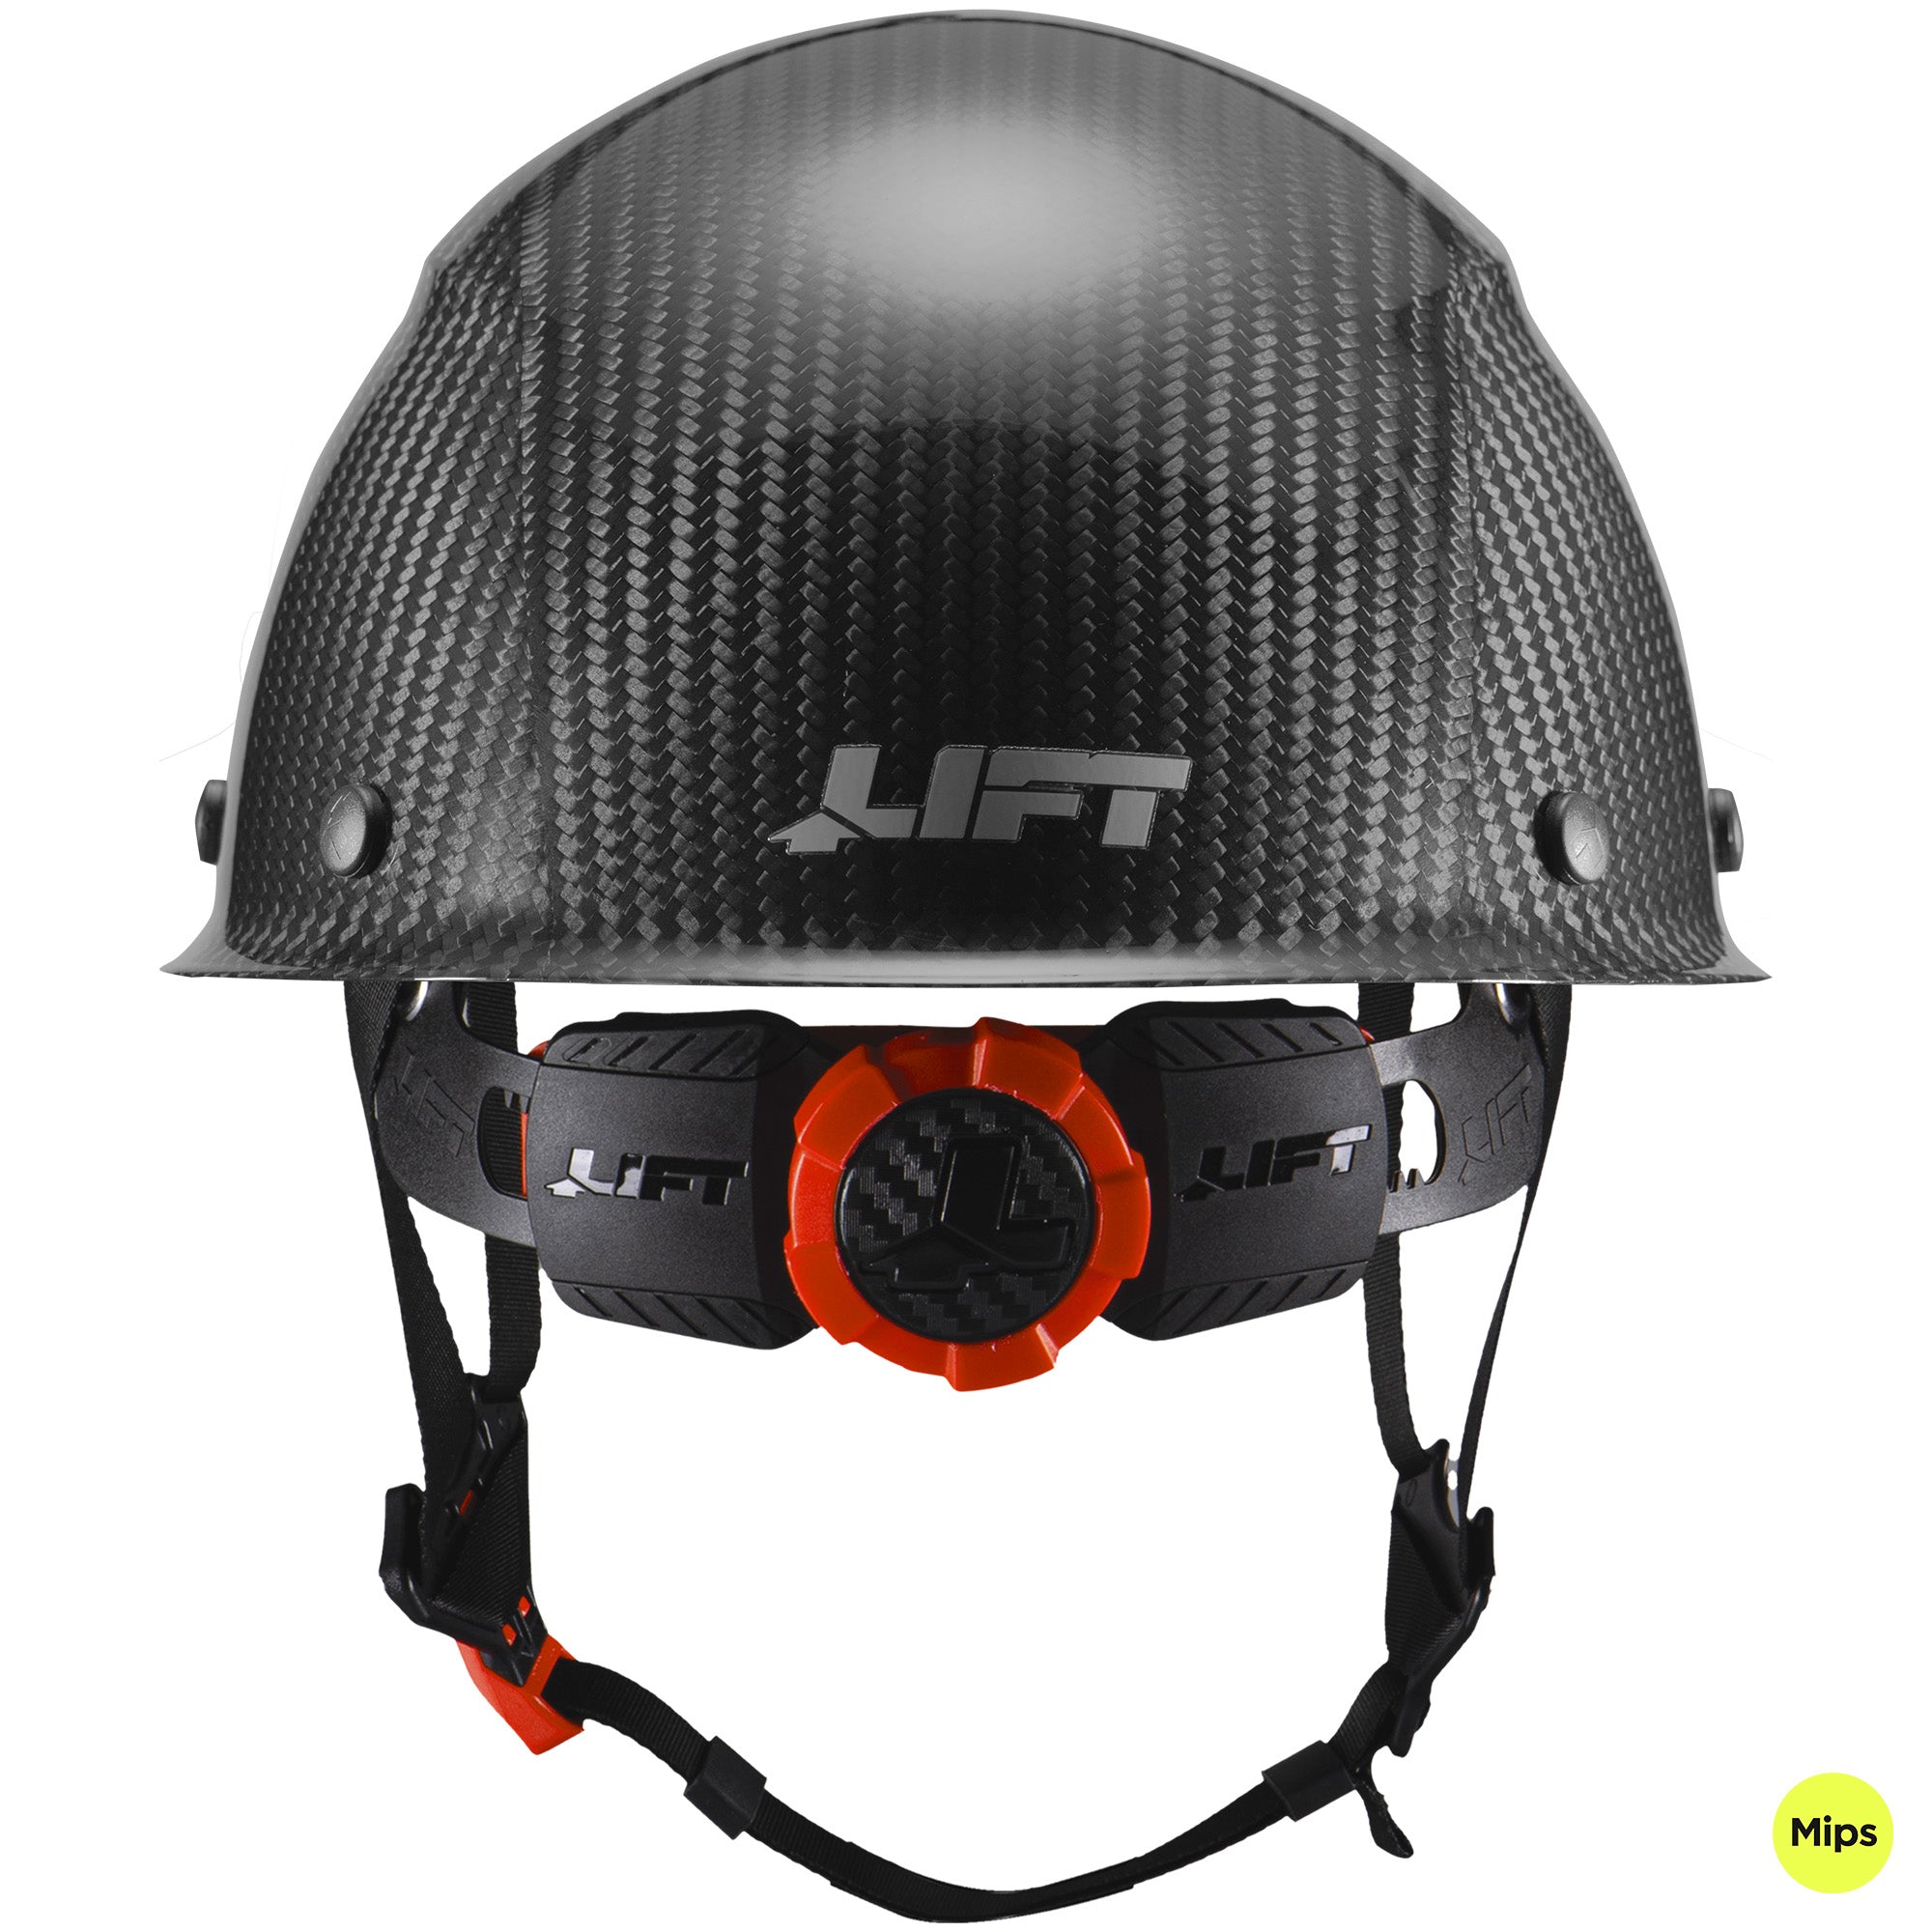 DAX Cap Style Hard Hat with Mips - Carbon Gloss - LIFT Safety